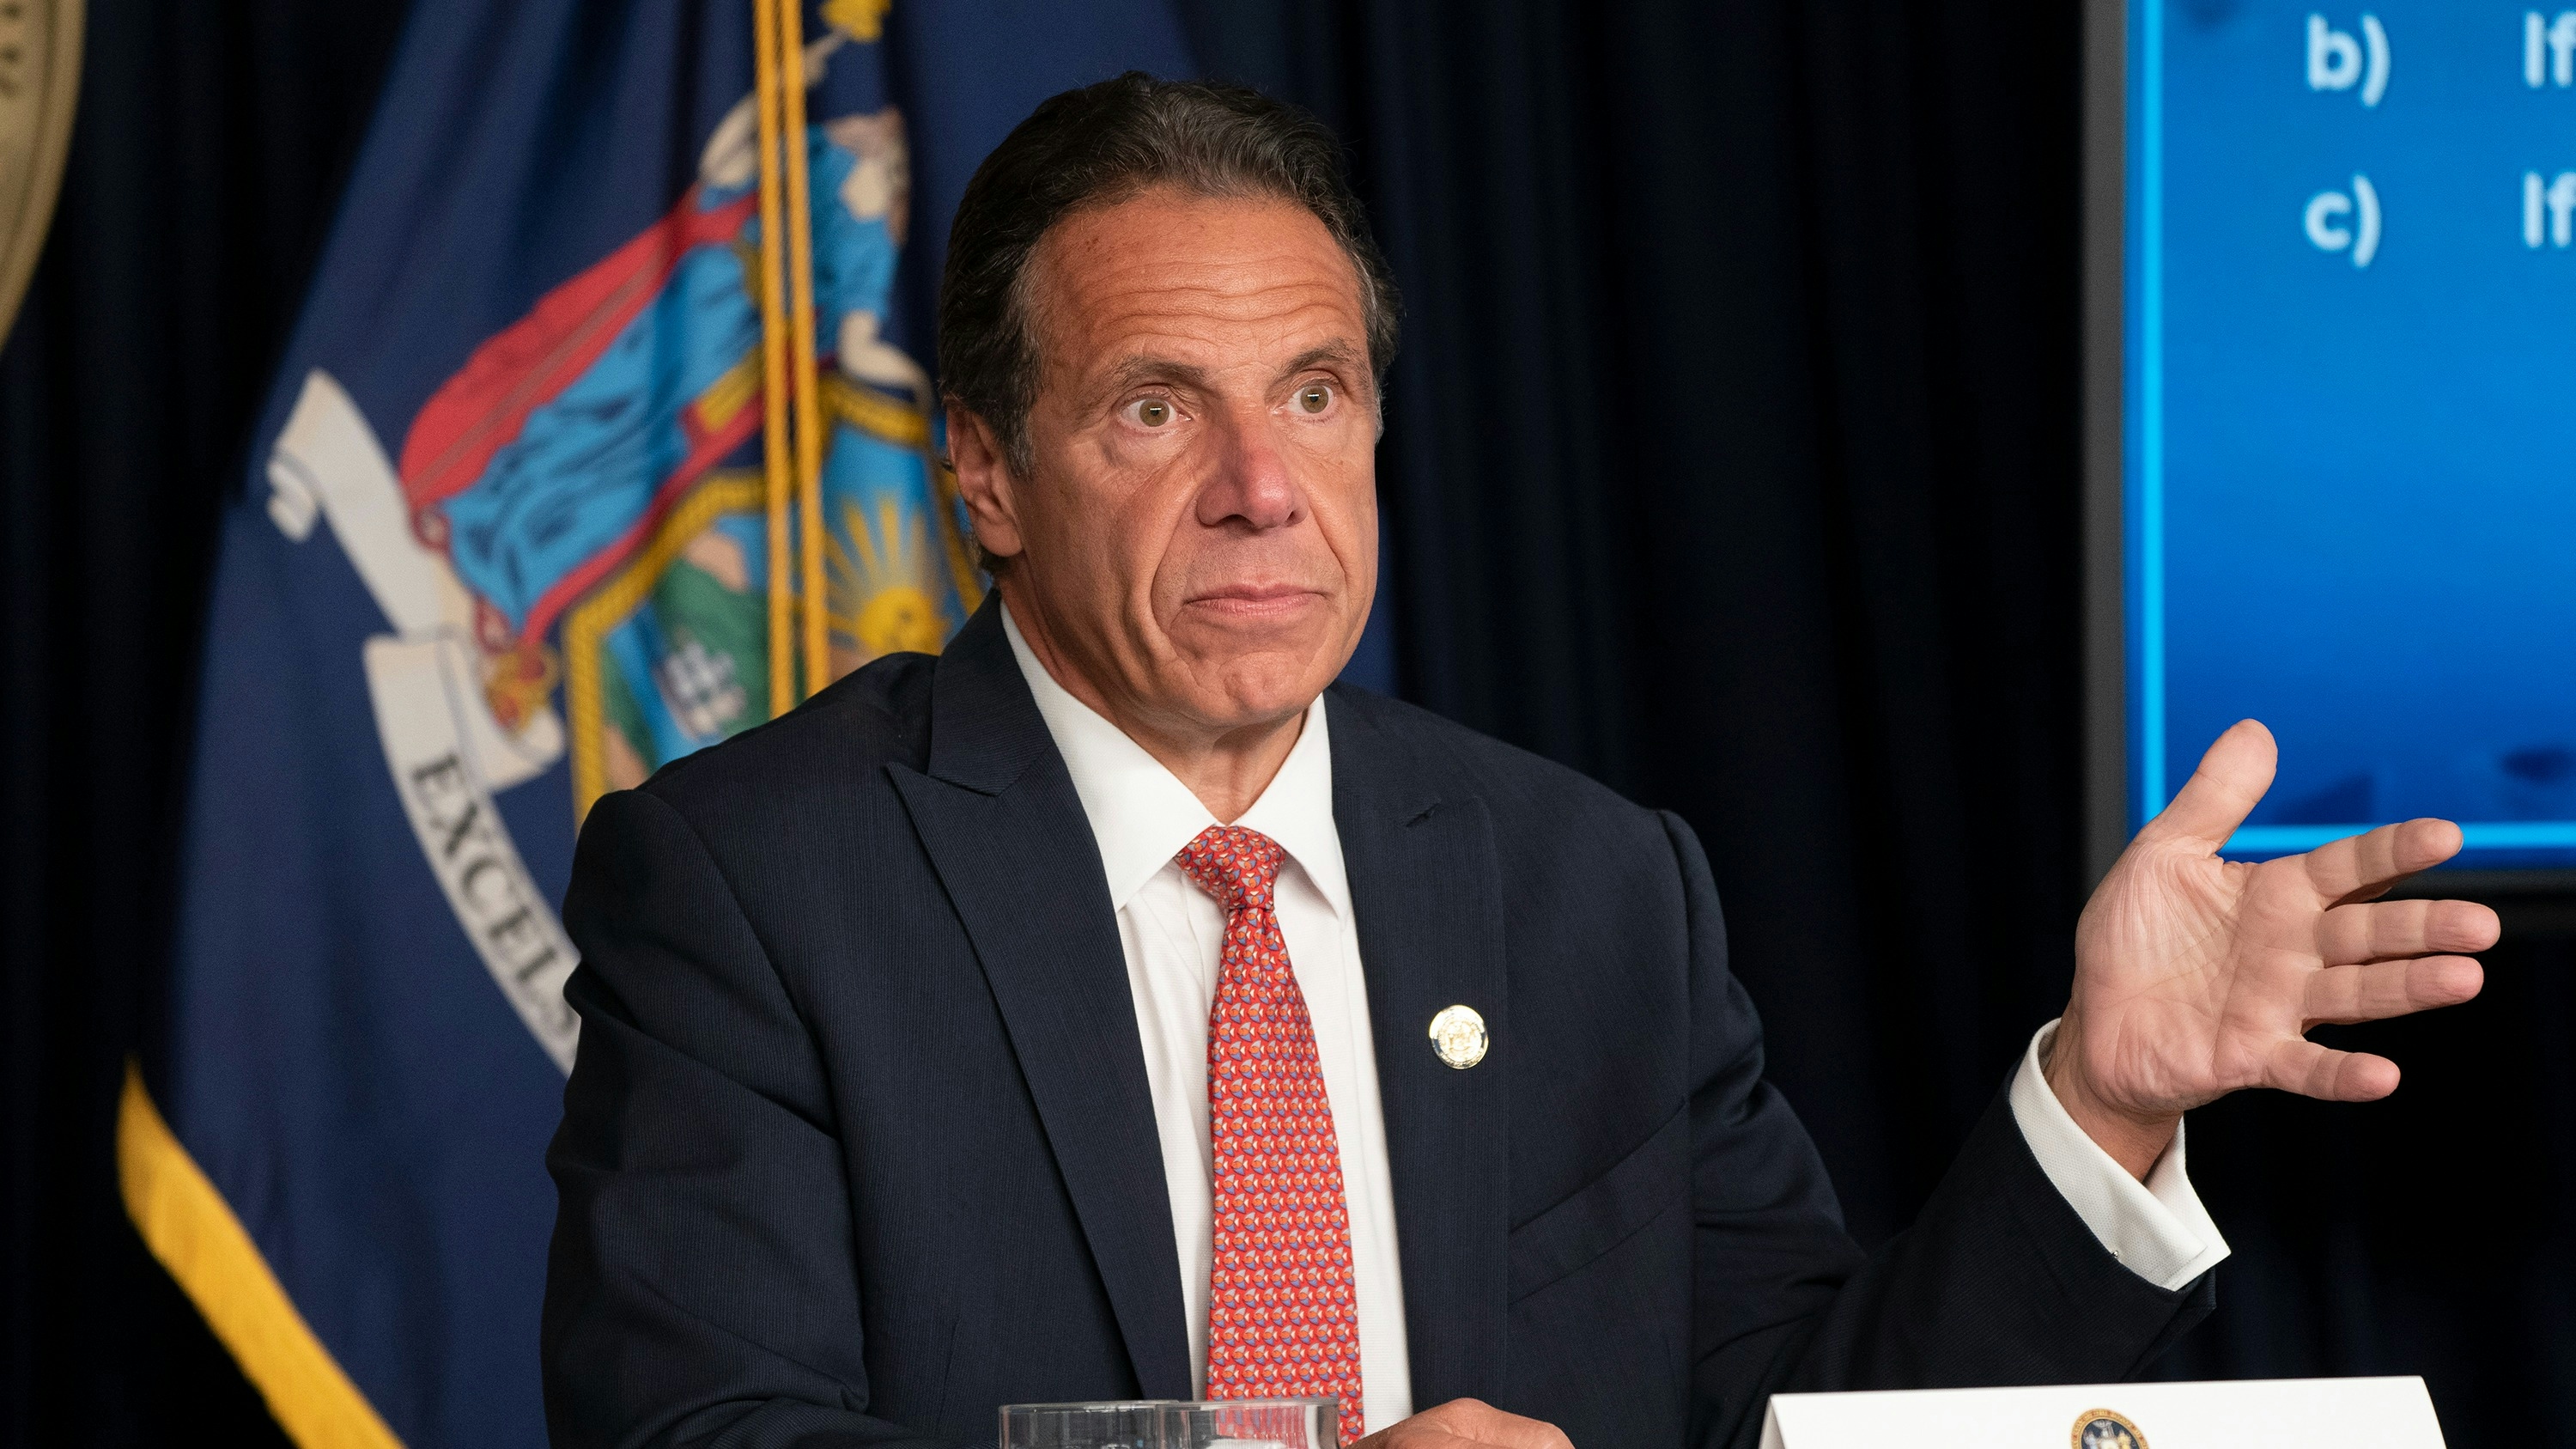 Governor Andrew Cuomo holds press briefing and makes announcement to combat COVID-19